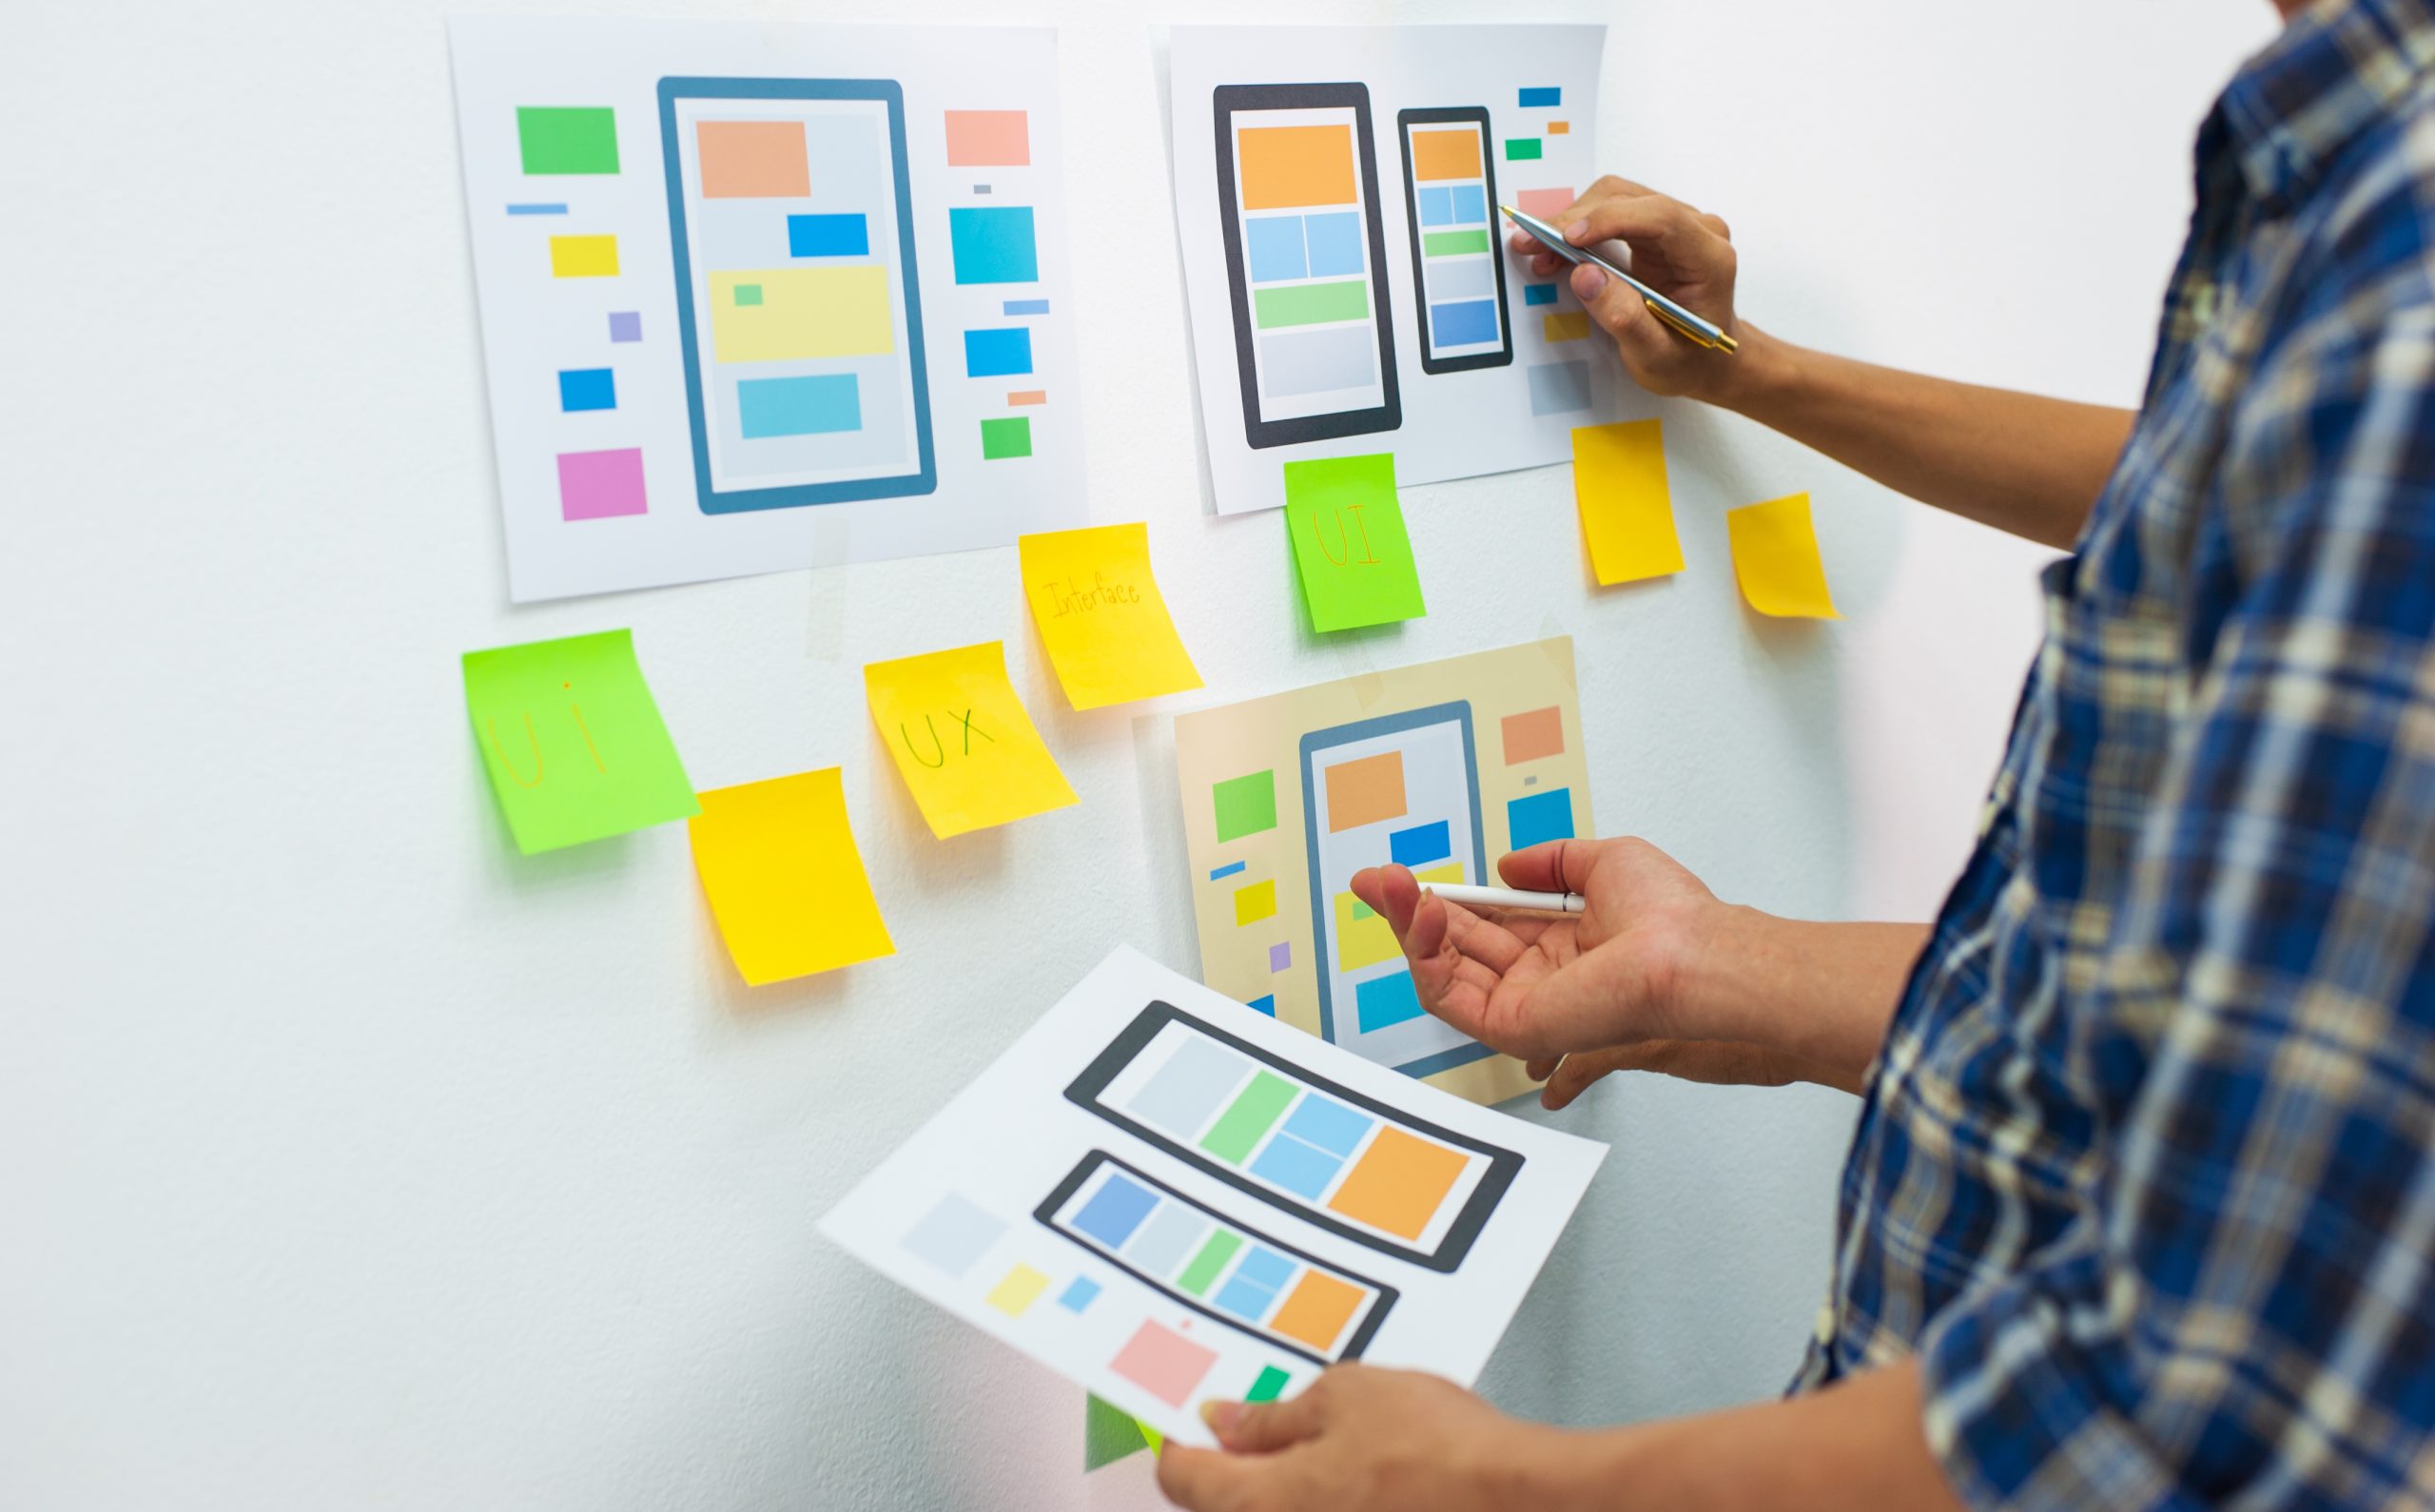  web designers work together to plan user interface layouts 